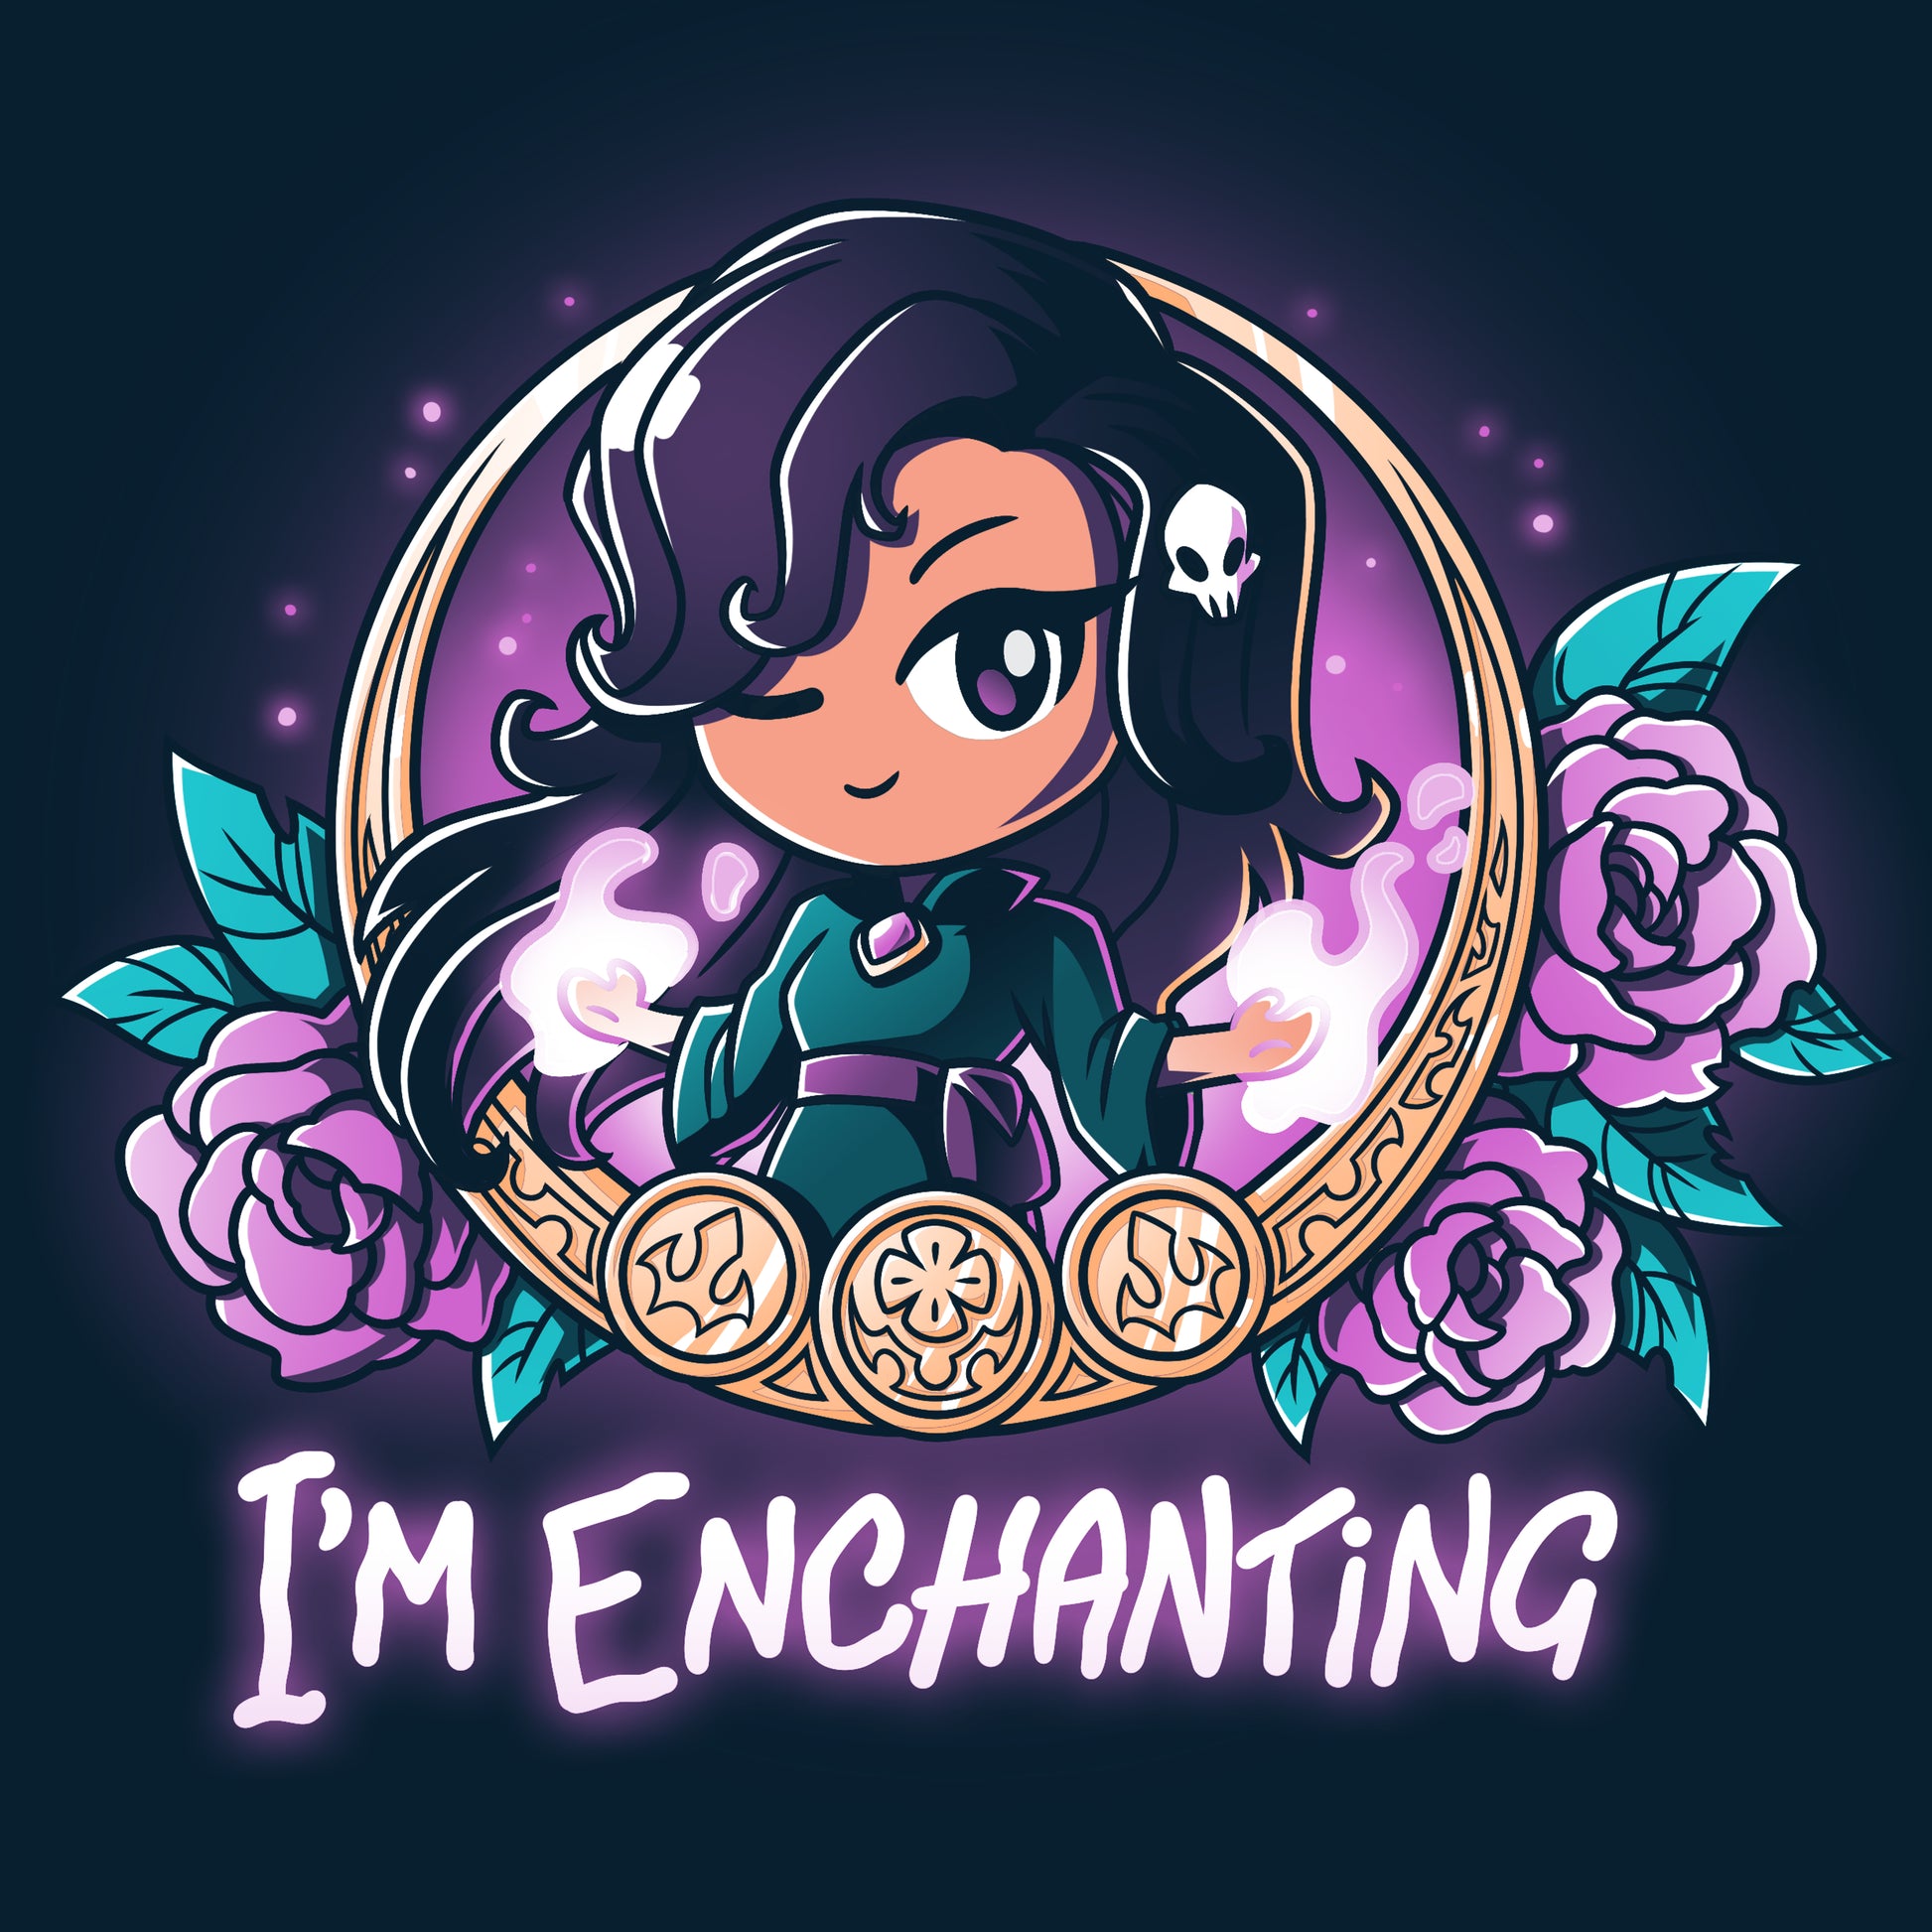 I'm TeeTurtle Enchanting - a Navy Blue girl with a flower in her hand.